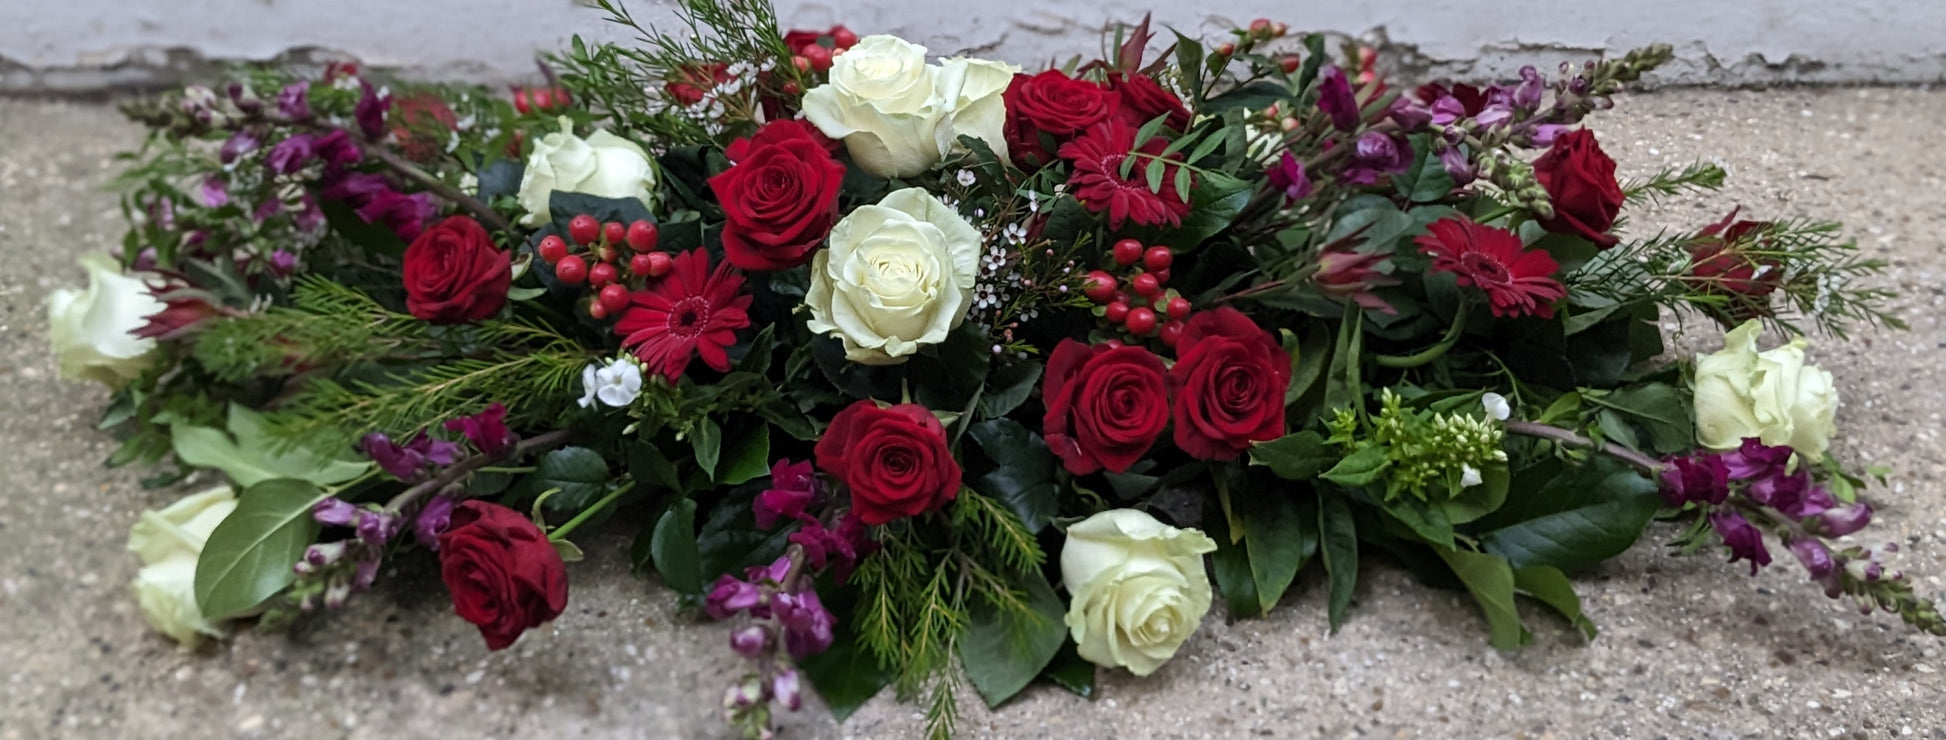 Rose Casket spray - Quality Flowers from Ann's Flowers - Just £150! Shop now at Ann's Flowers